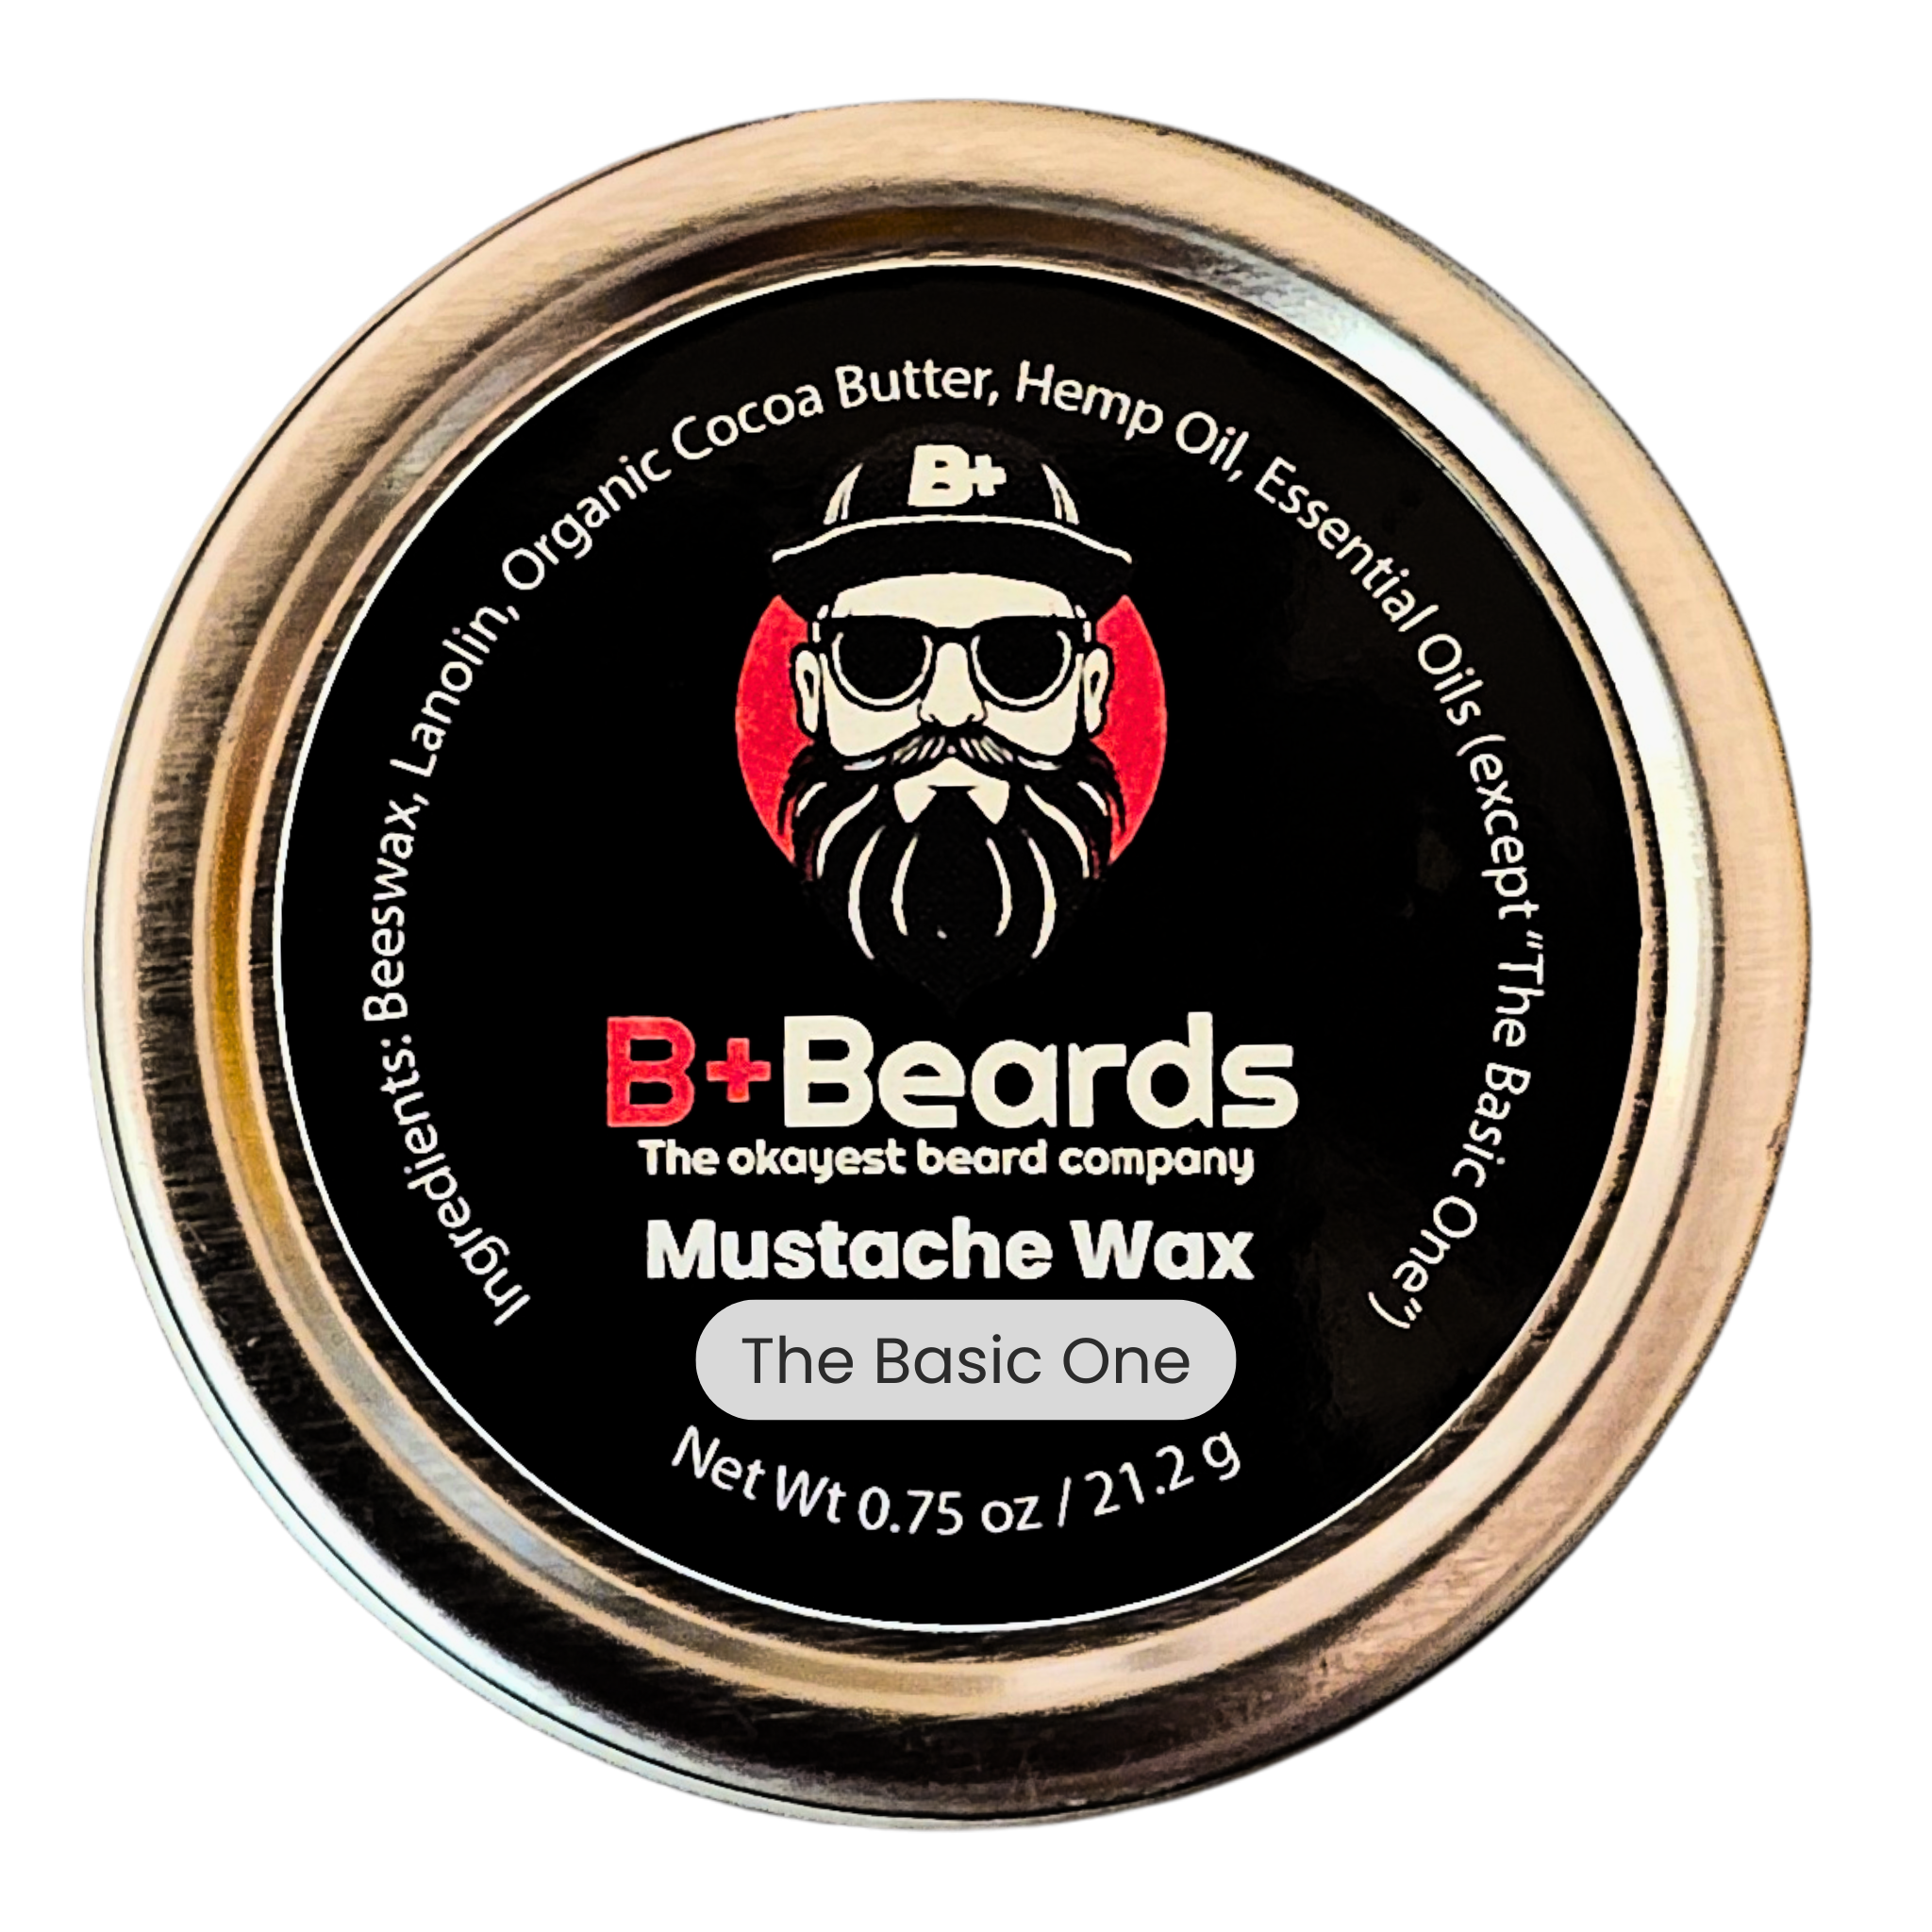 The Basic One Mustache Wax